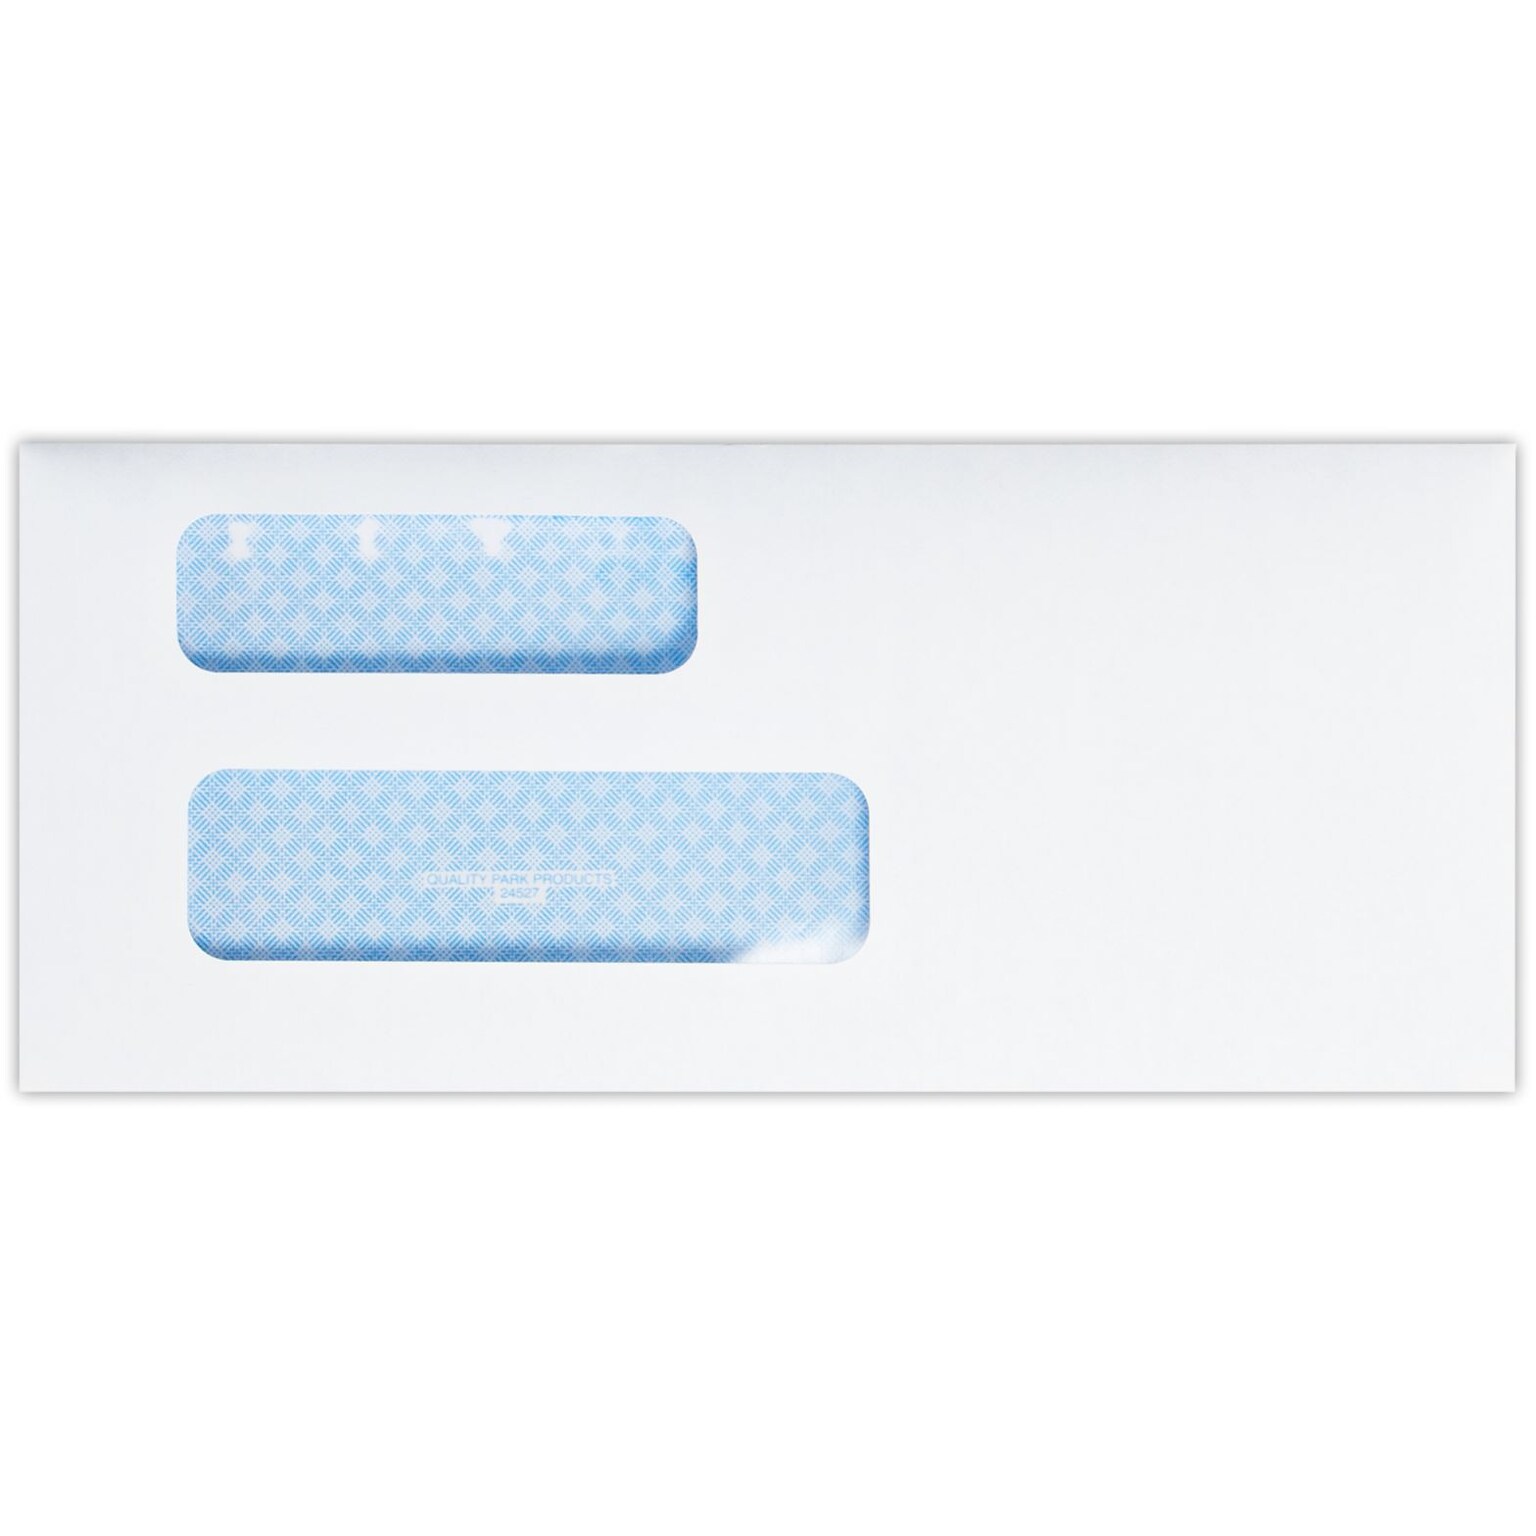 Quality Park Moistenable Glue Security Tinted #9 Double Window Envelope, 3 7/8 x 8 7/8, Bright White, 250/Pack (9DW-W-250)